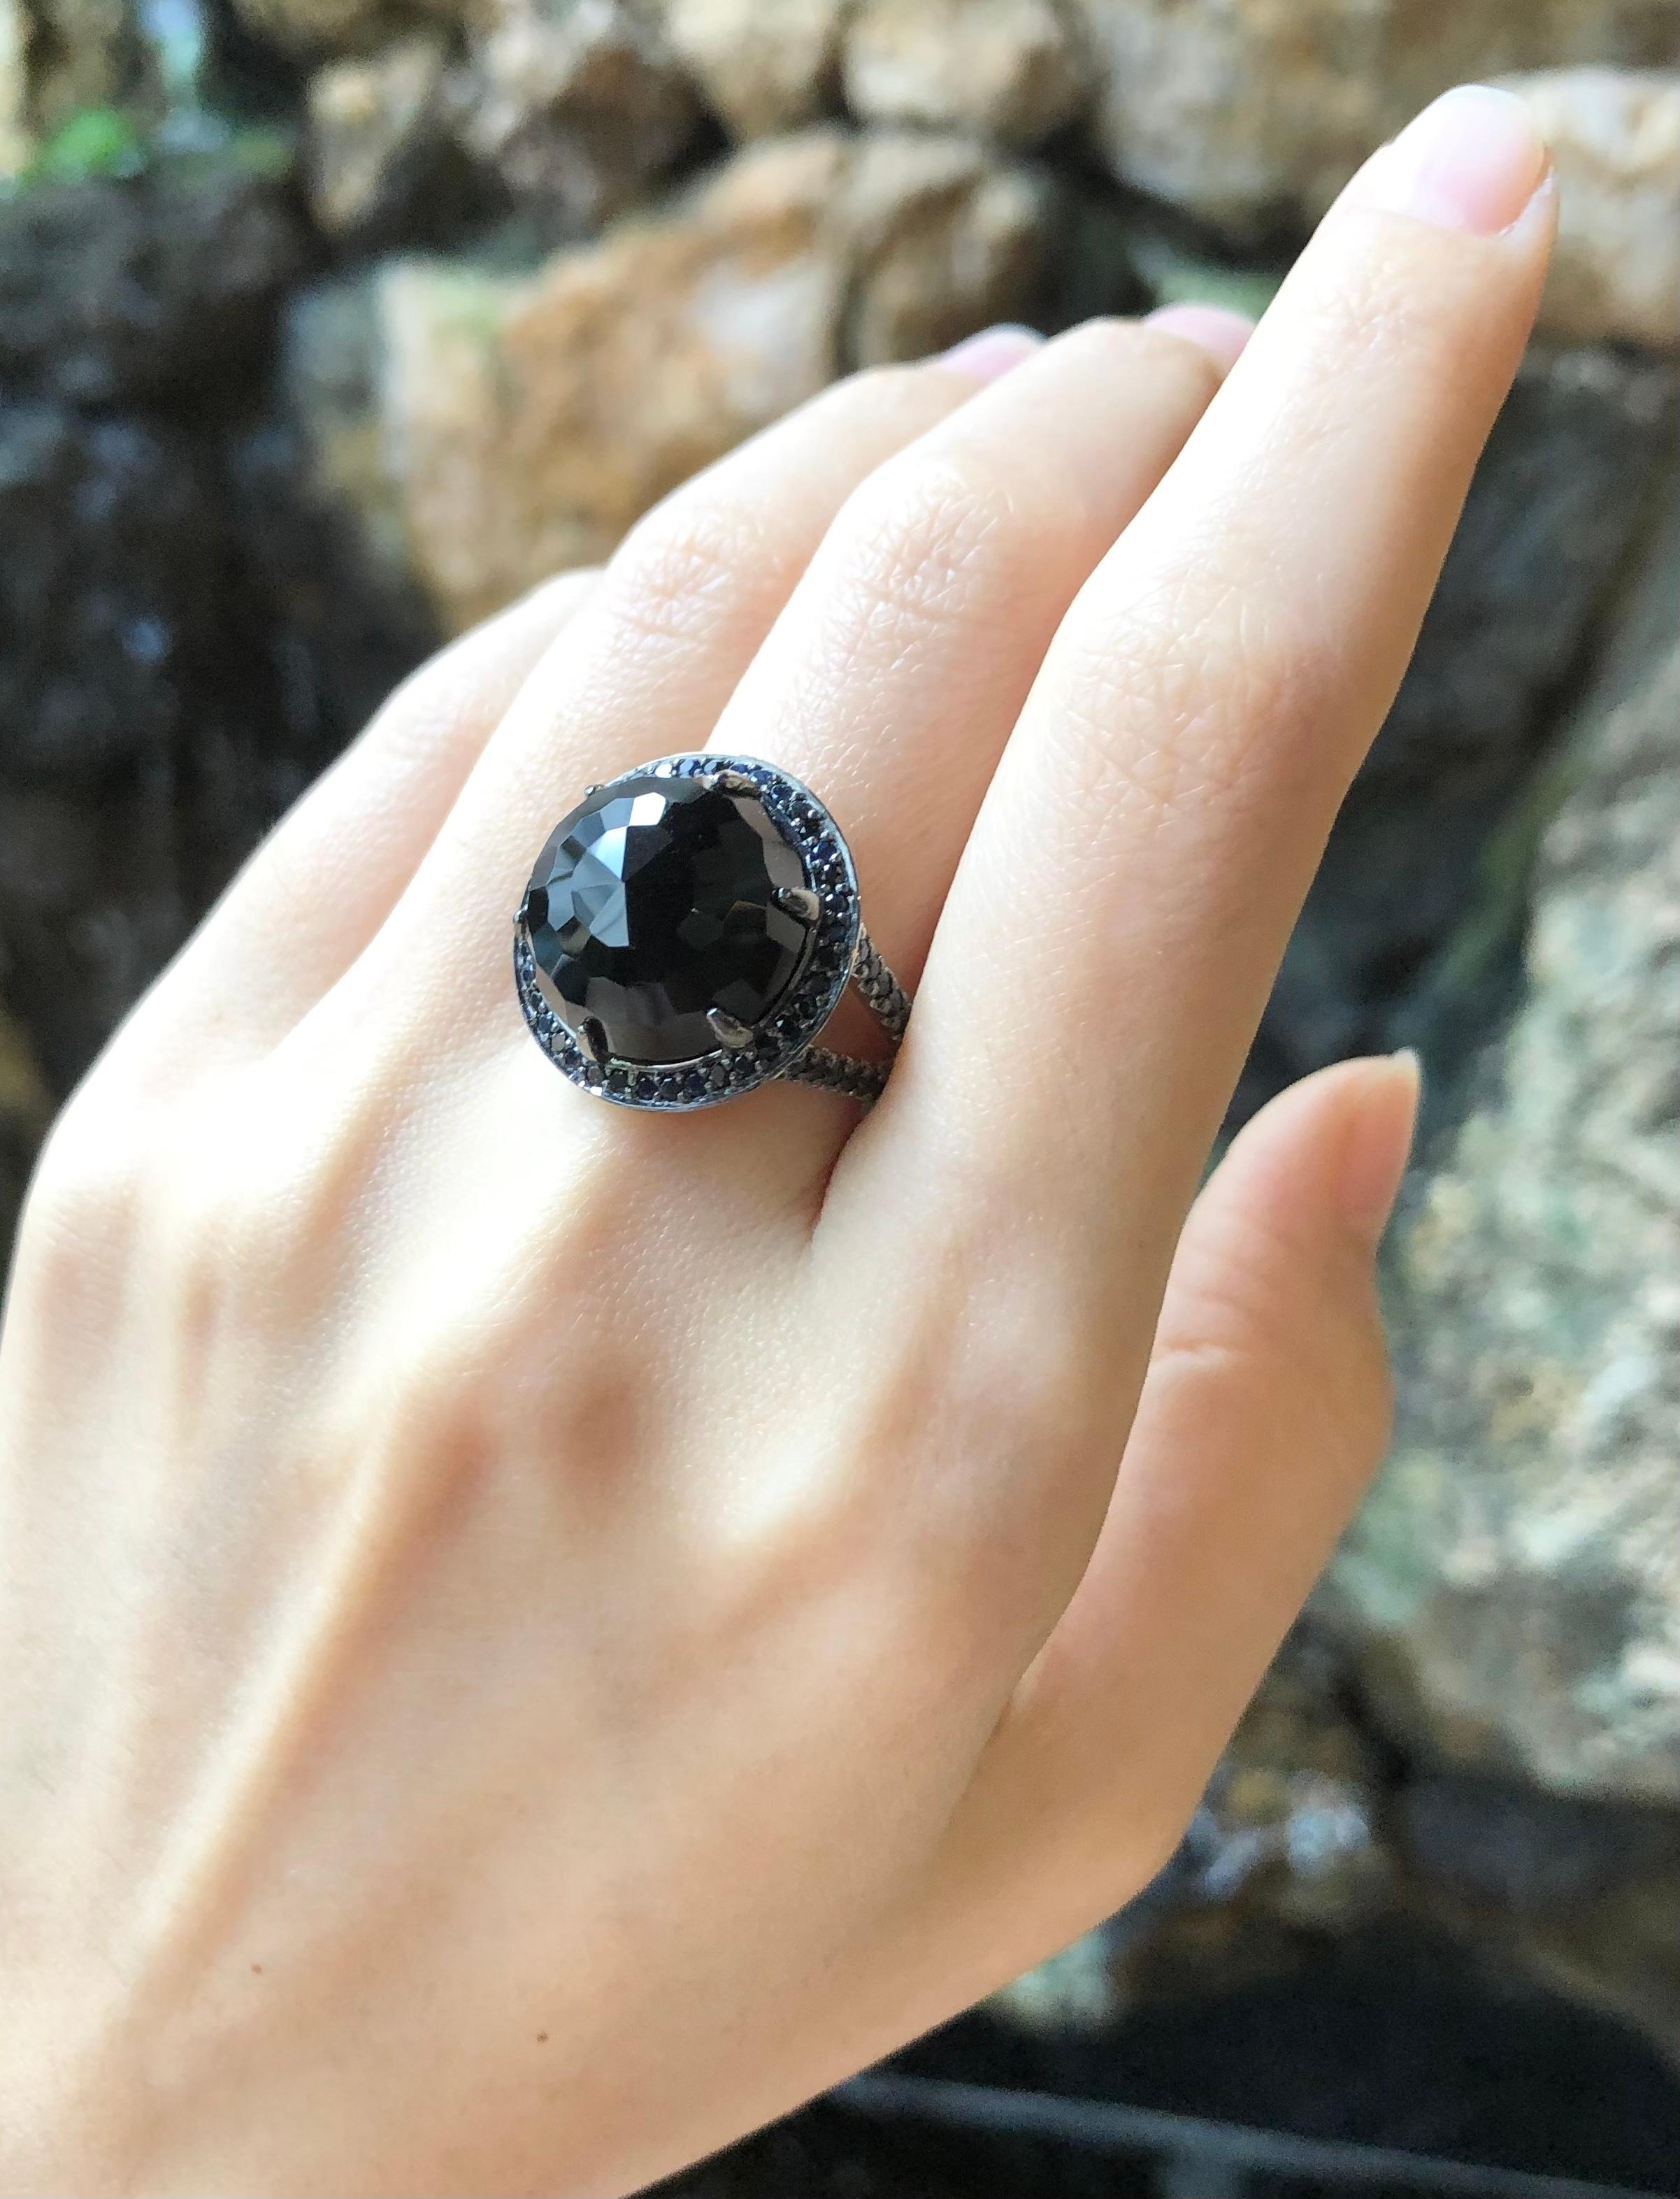 Black Agate 12.30 carats with Black Sapphire 0.97 carat Ring set in 18 Karat White Gold Settings

Width:  1.8 cm 
Length: 1.8 cm
Ring Size: 54
Total Weight: 9.64 grams


